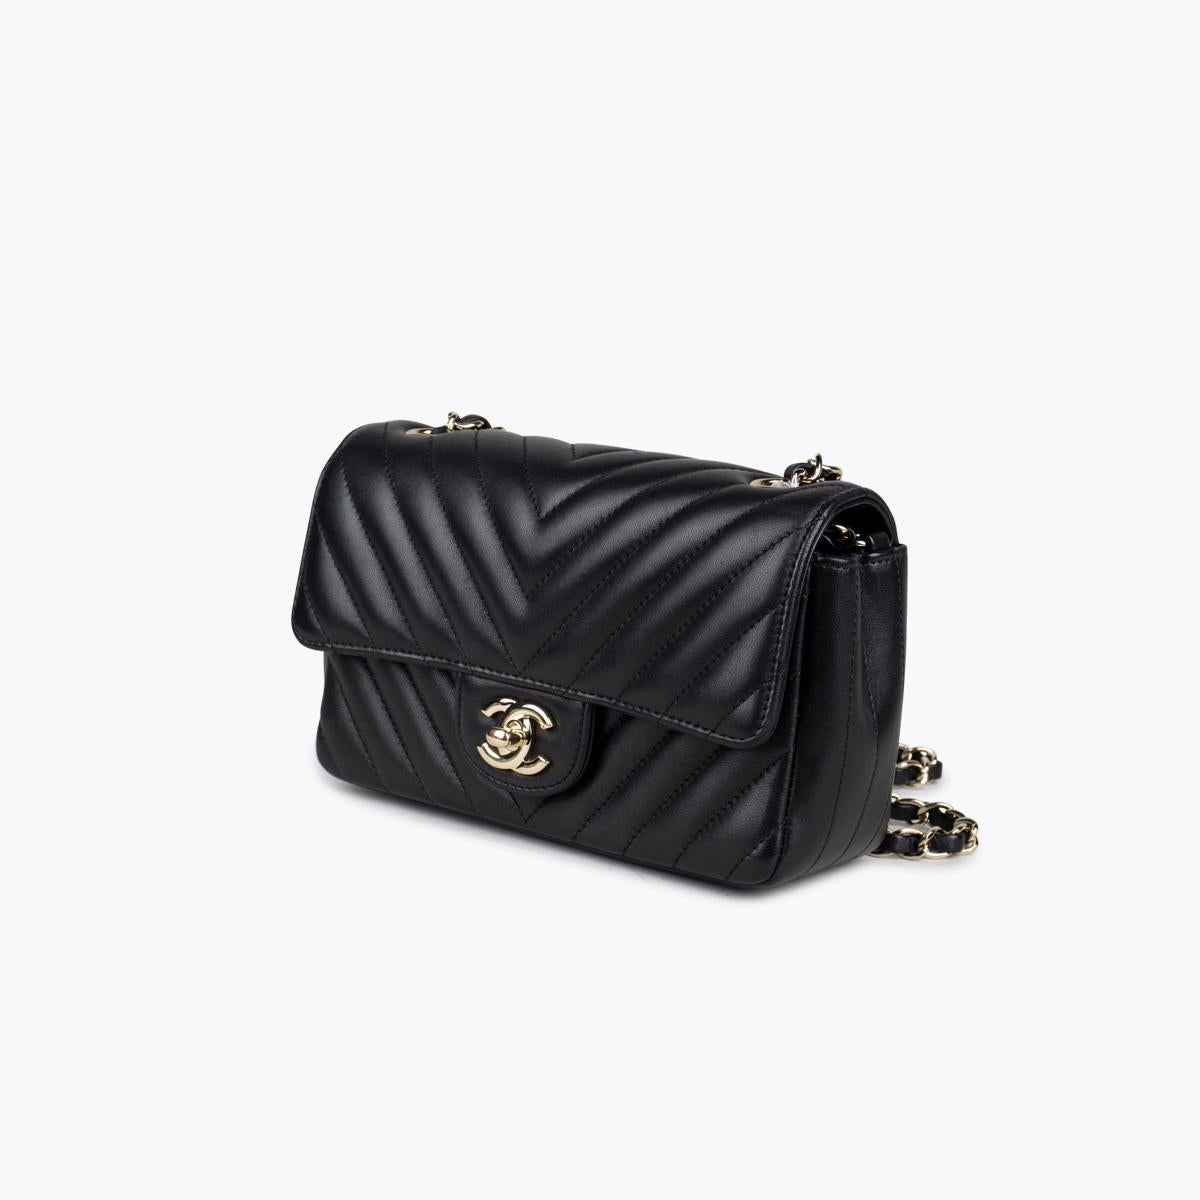 Chanel Mini Classic Chevron Flap Bag

– Silver-tone hardware
– Interlocking CC logo & quilted Pattern
– Chain-link shoulder straps
– Single exterior pocket
– Leather lining & dual interior pockets
–Turn-lock closure at front

Overall Preloved